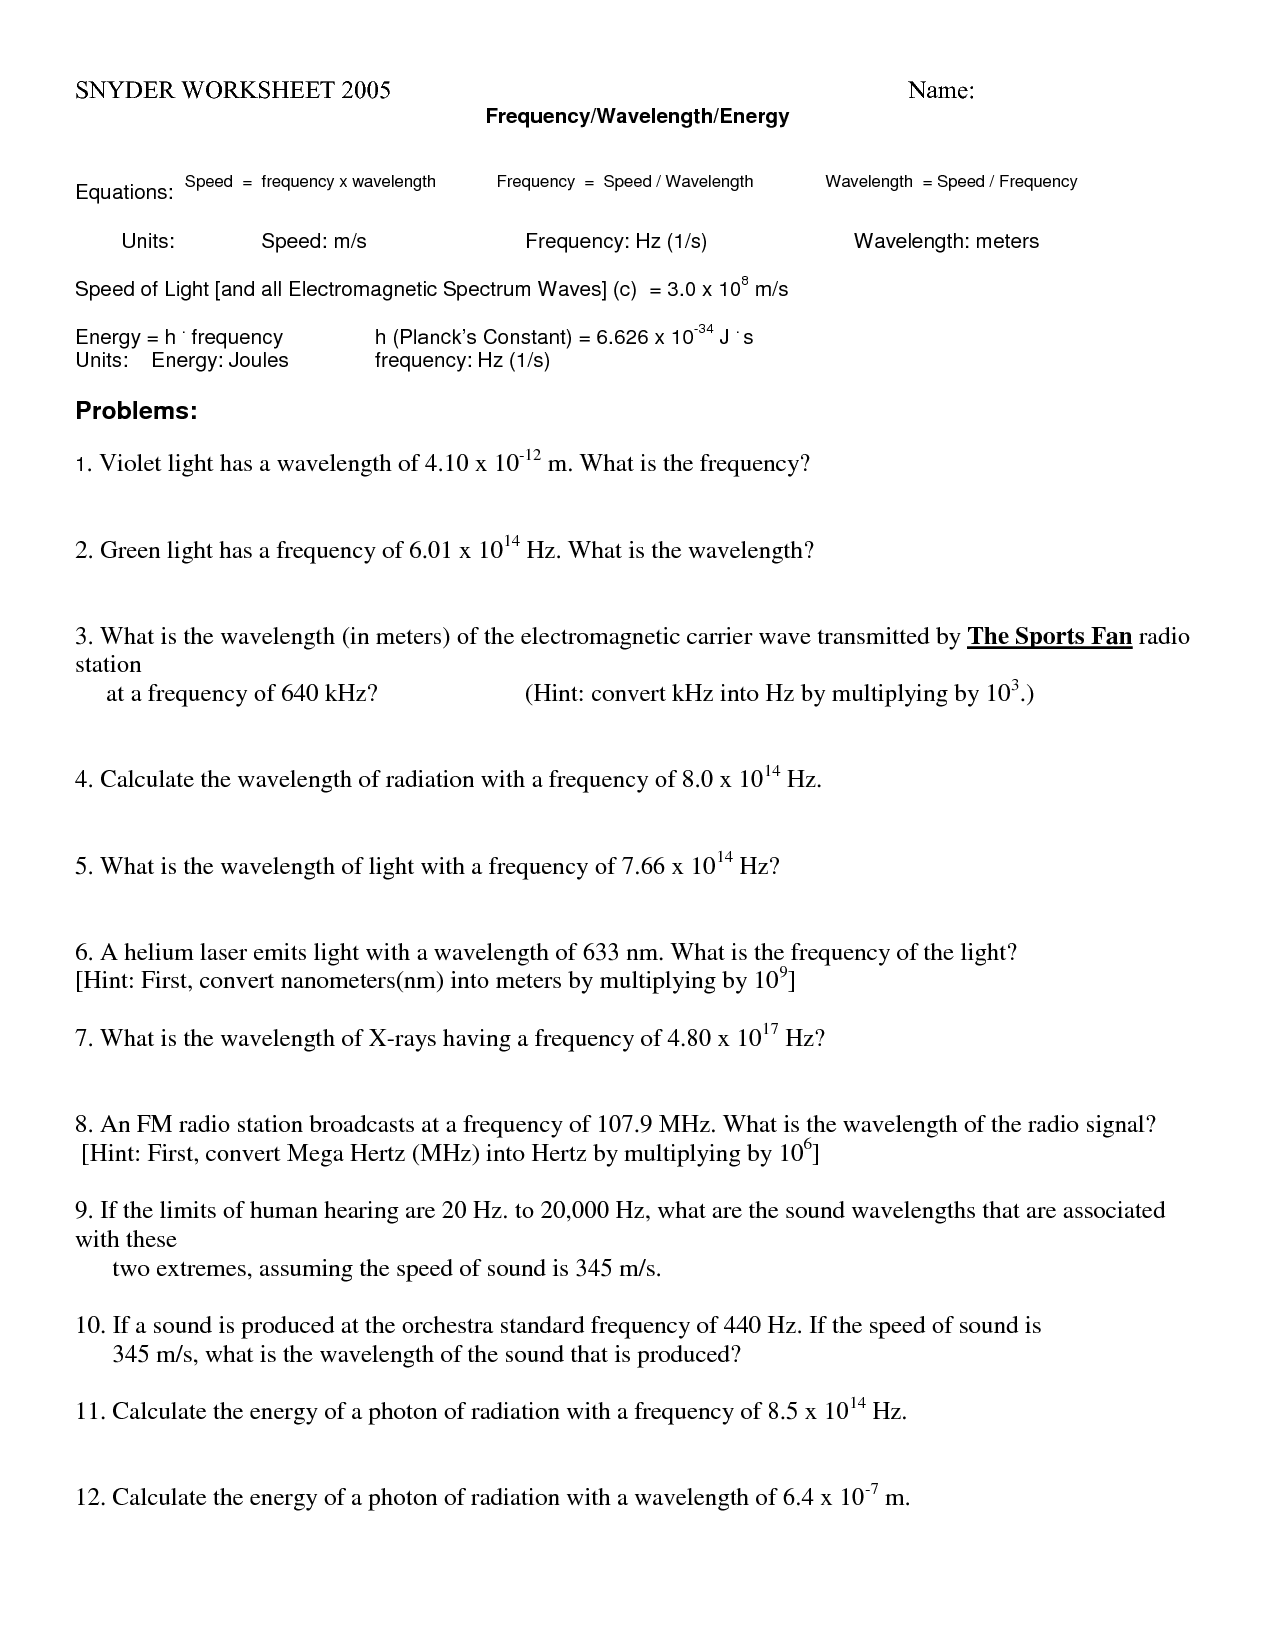 18-best-images-of-light-worksheets-with-answers-bill-nye-light-and-color-worksheet-answers